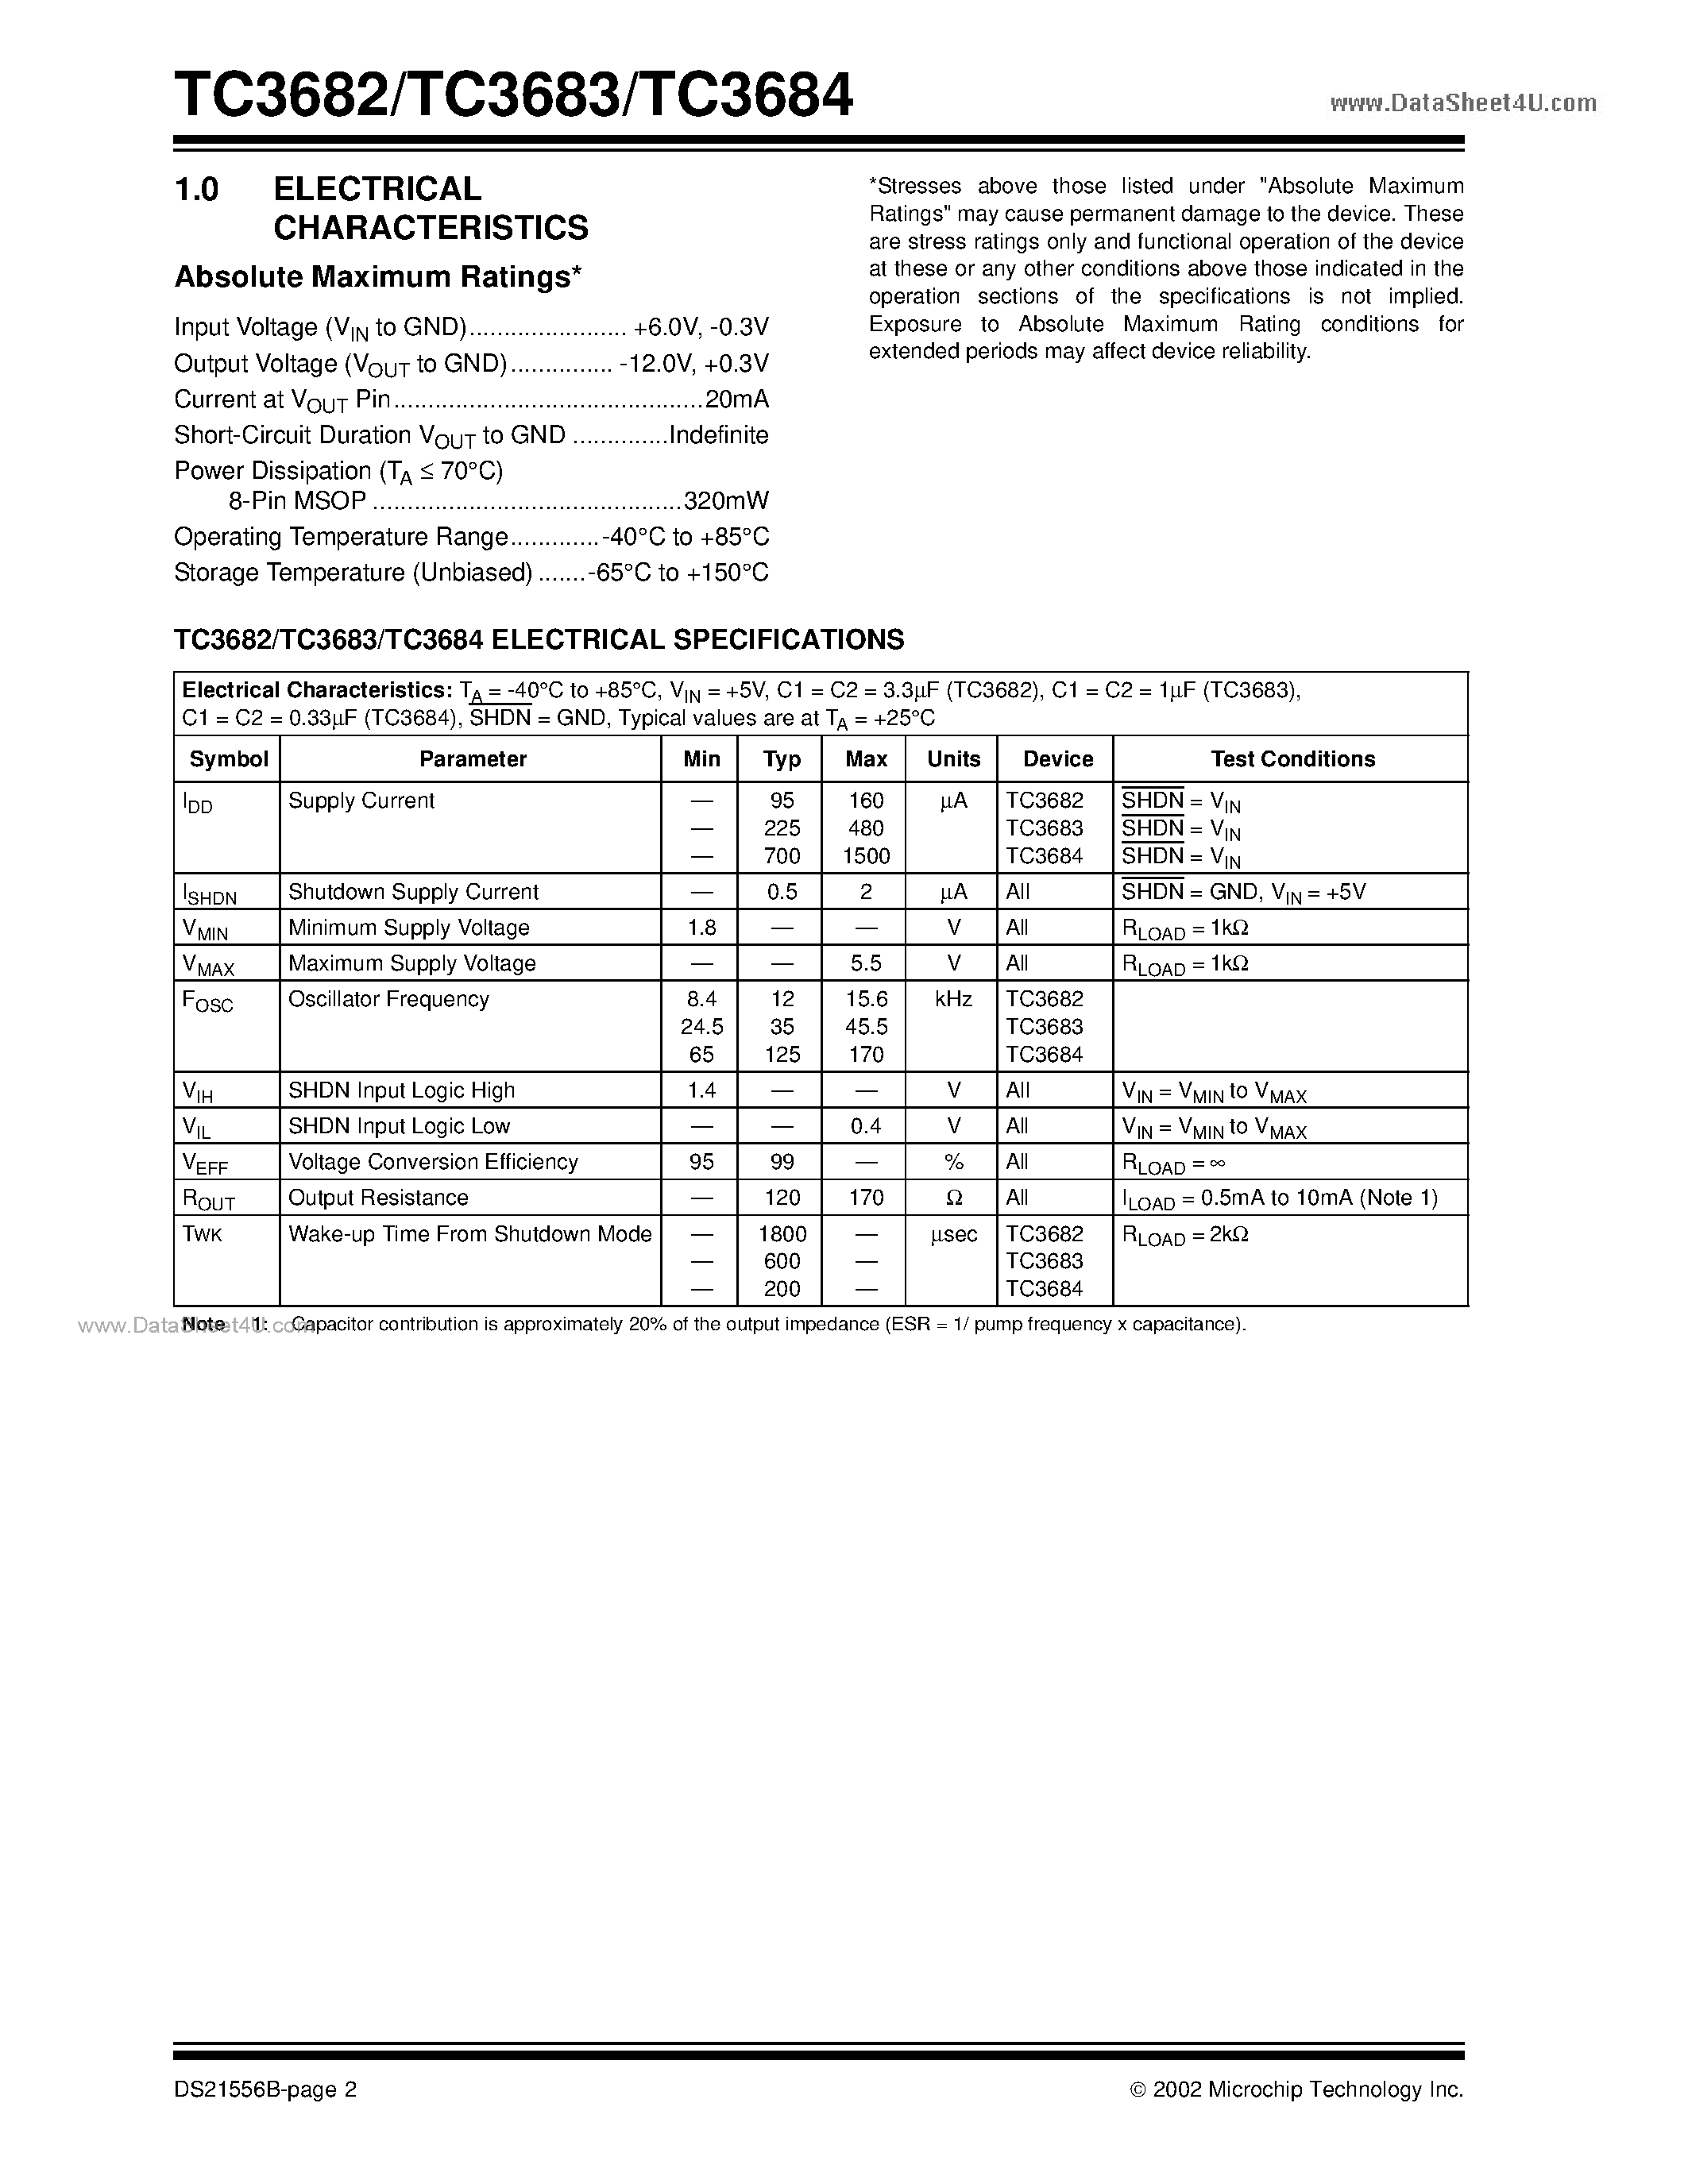 Datasheet TC3682 - (TC3682 - TC3684) Inverting Charge Pump Voltage Doublers page 2